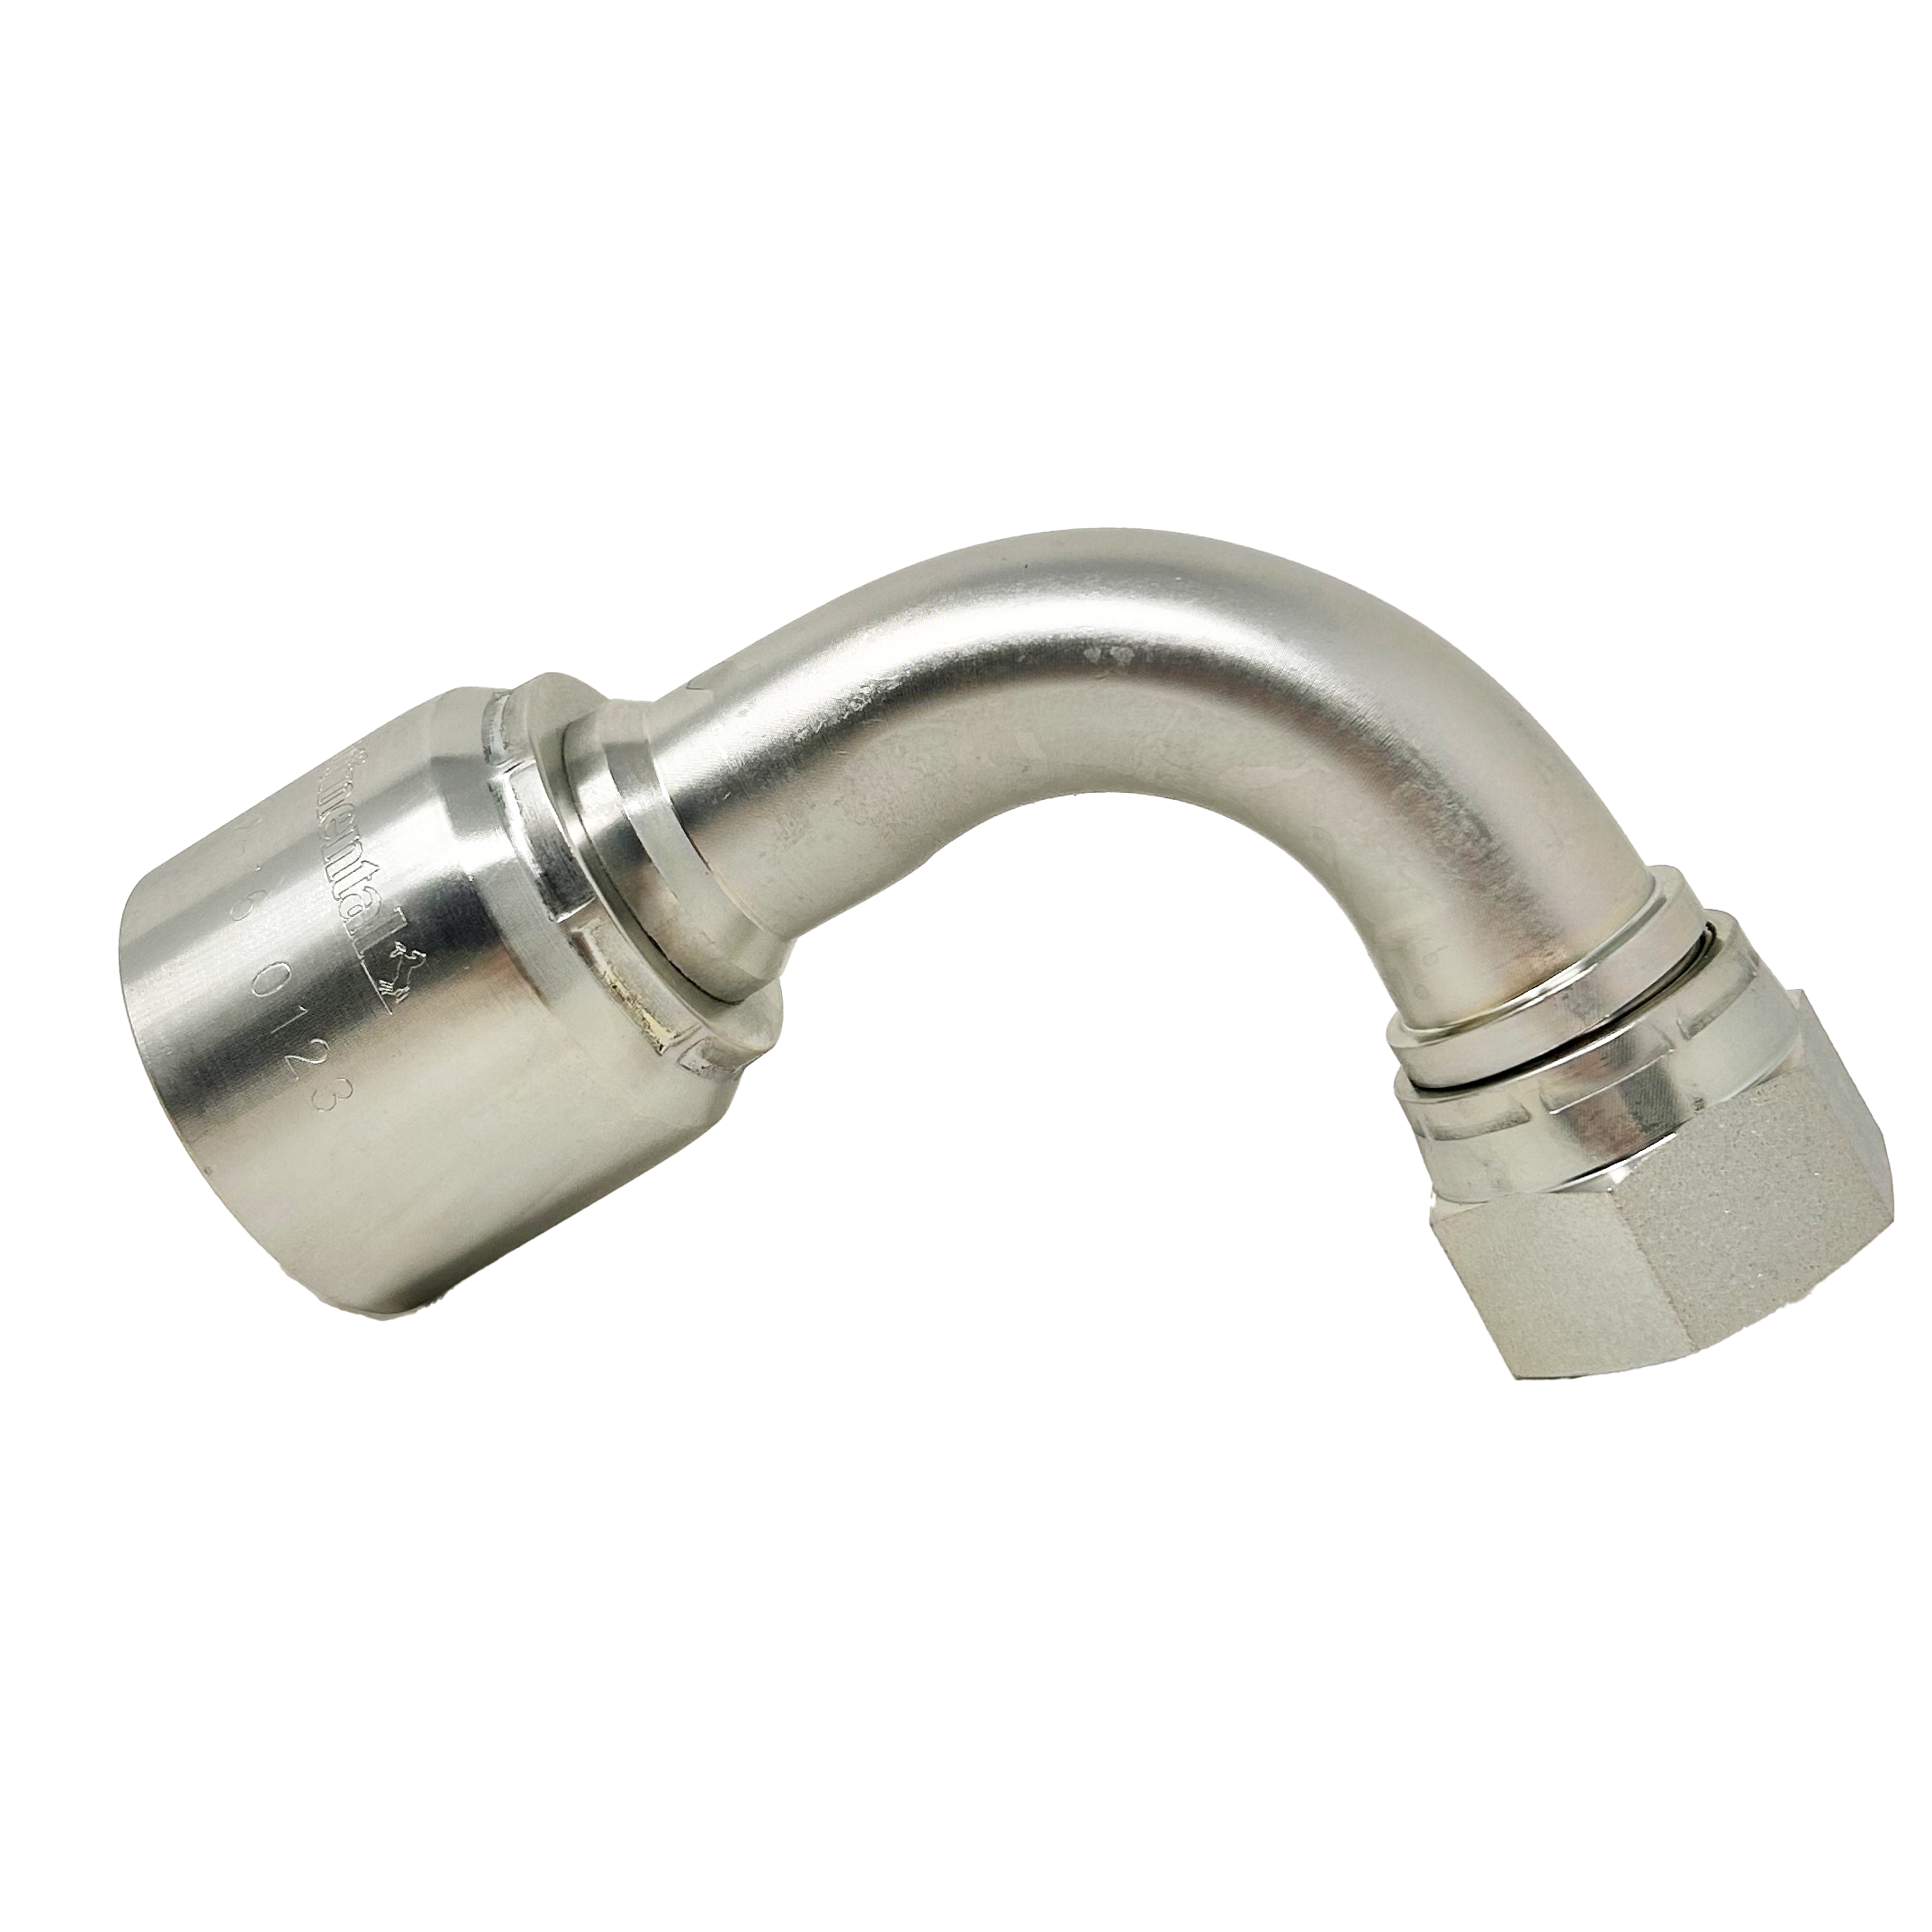 B2-JCFX90-0606: Continental Hose Fitting, 0.375 (3/8") Hose ID x 9/16-18 Female JIC, 90-Degree Swivel Connection